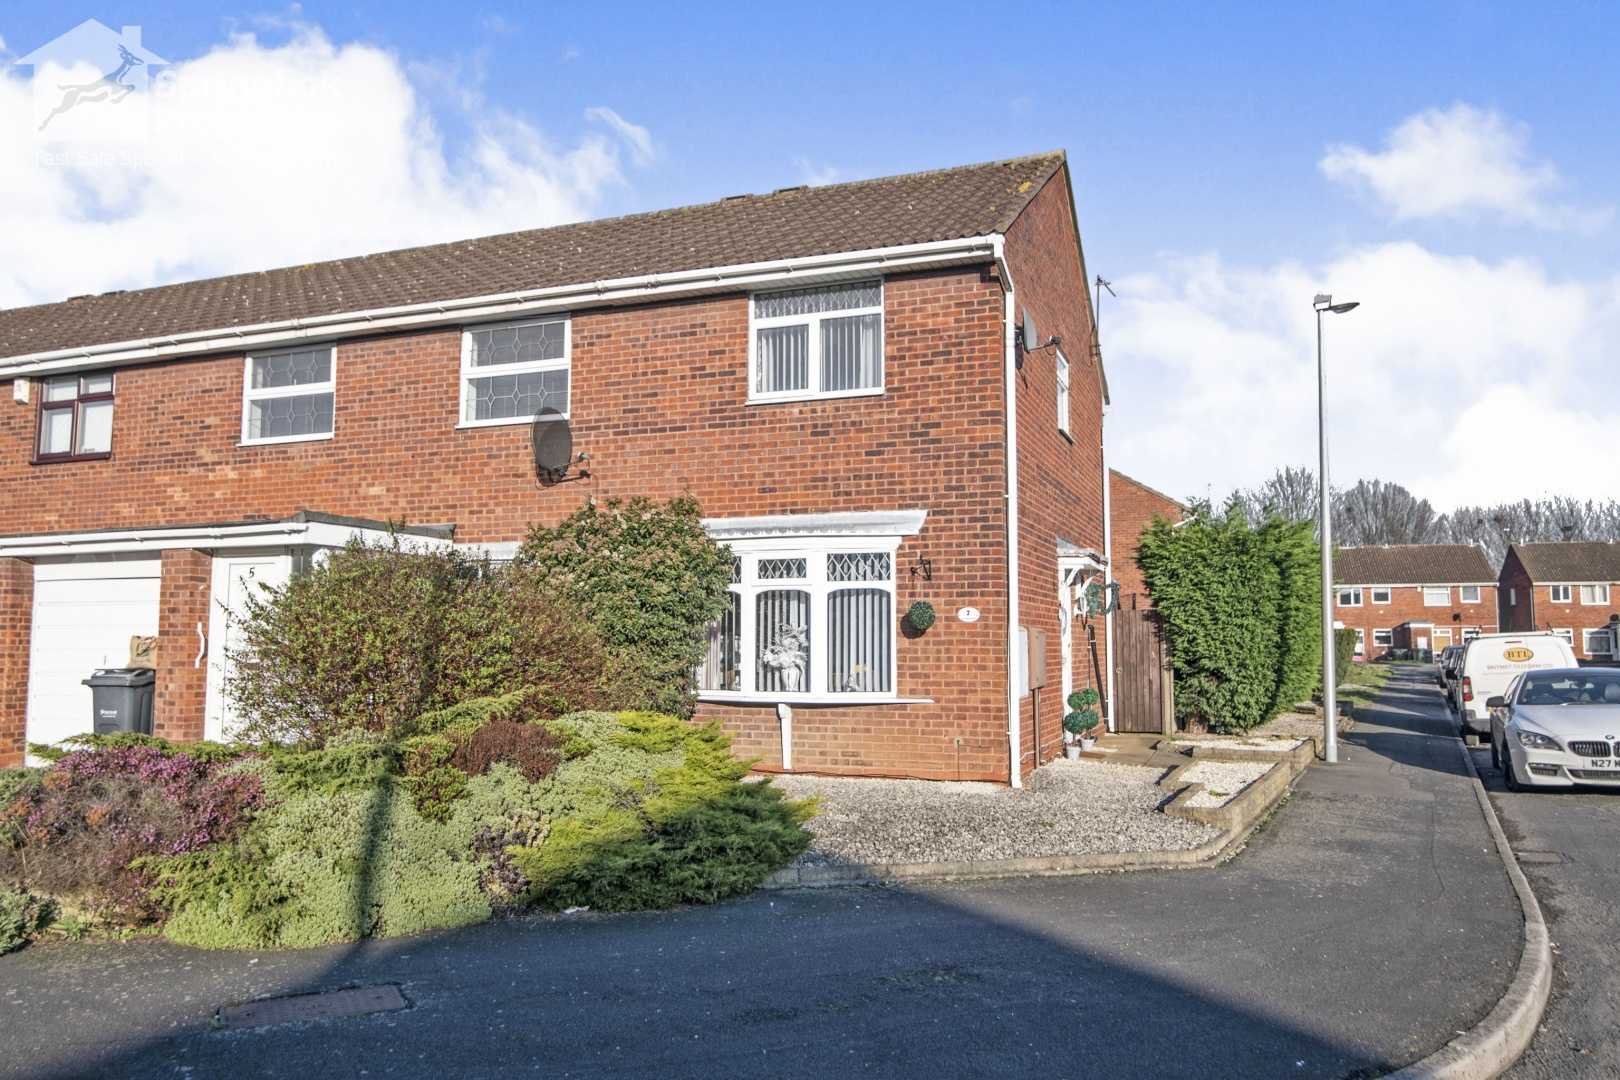 House in Tipton, Dudley 11391404